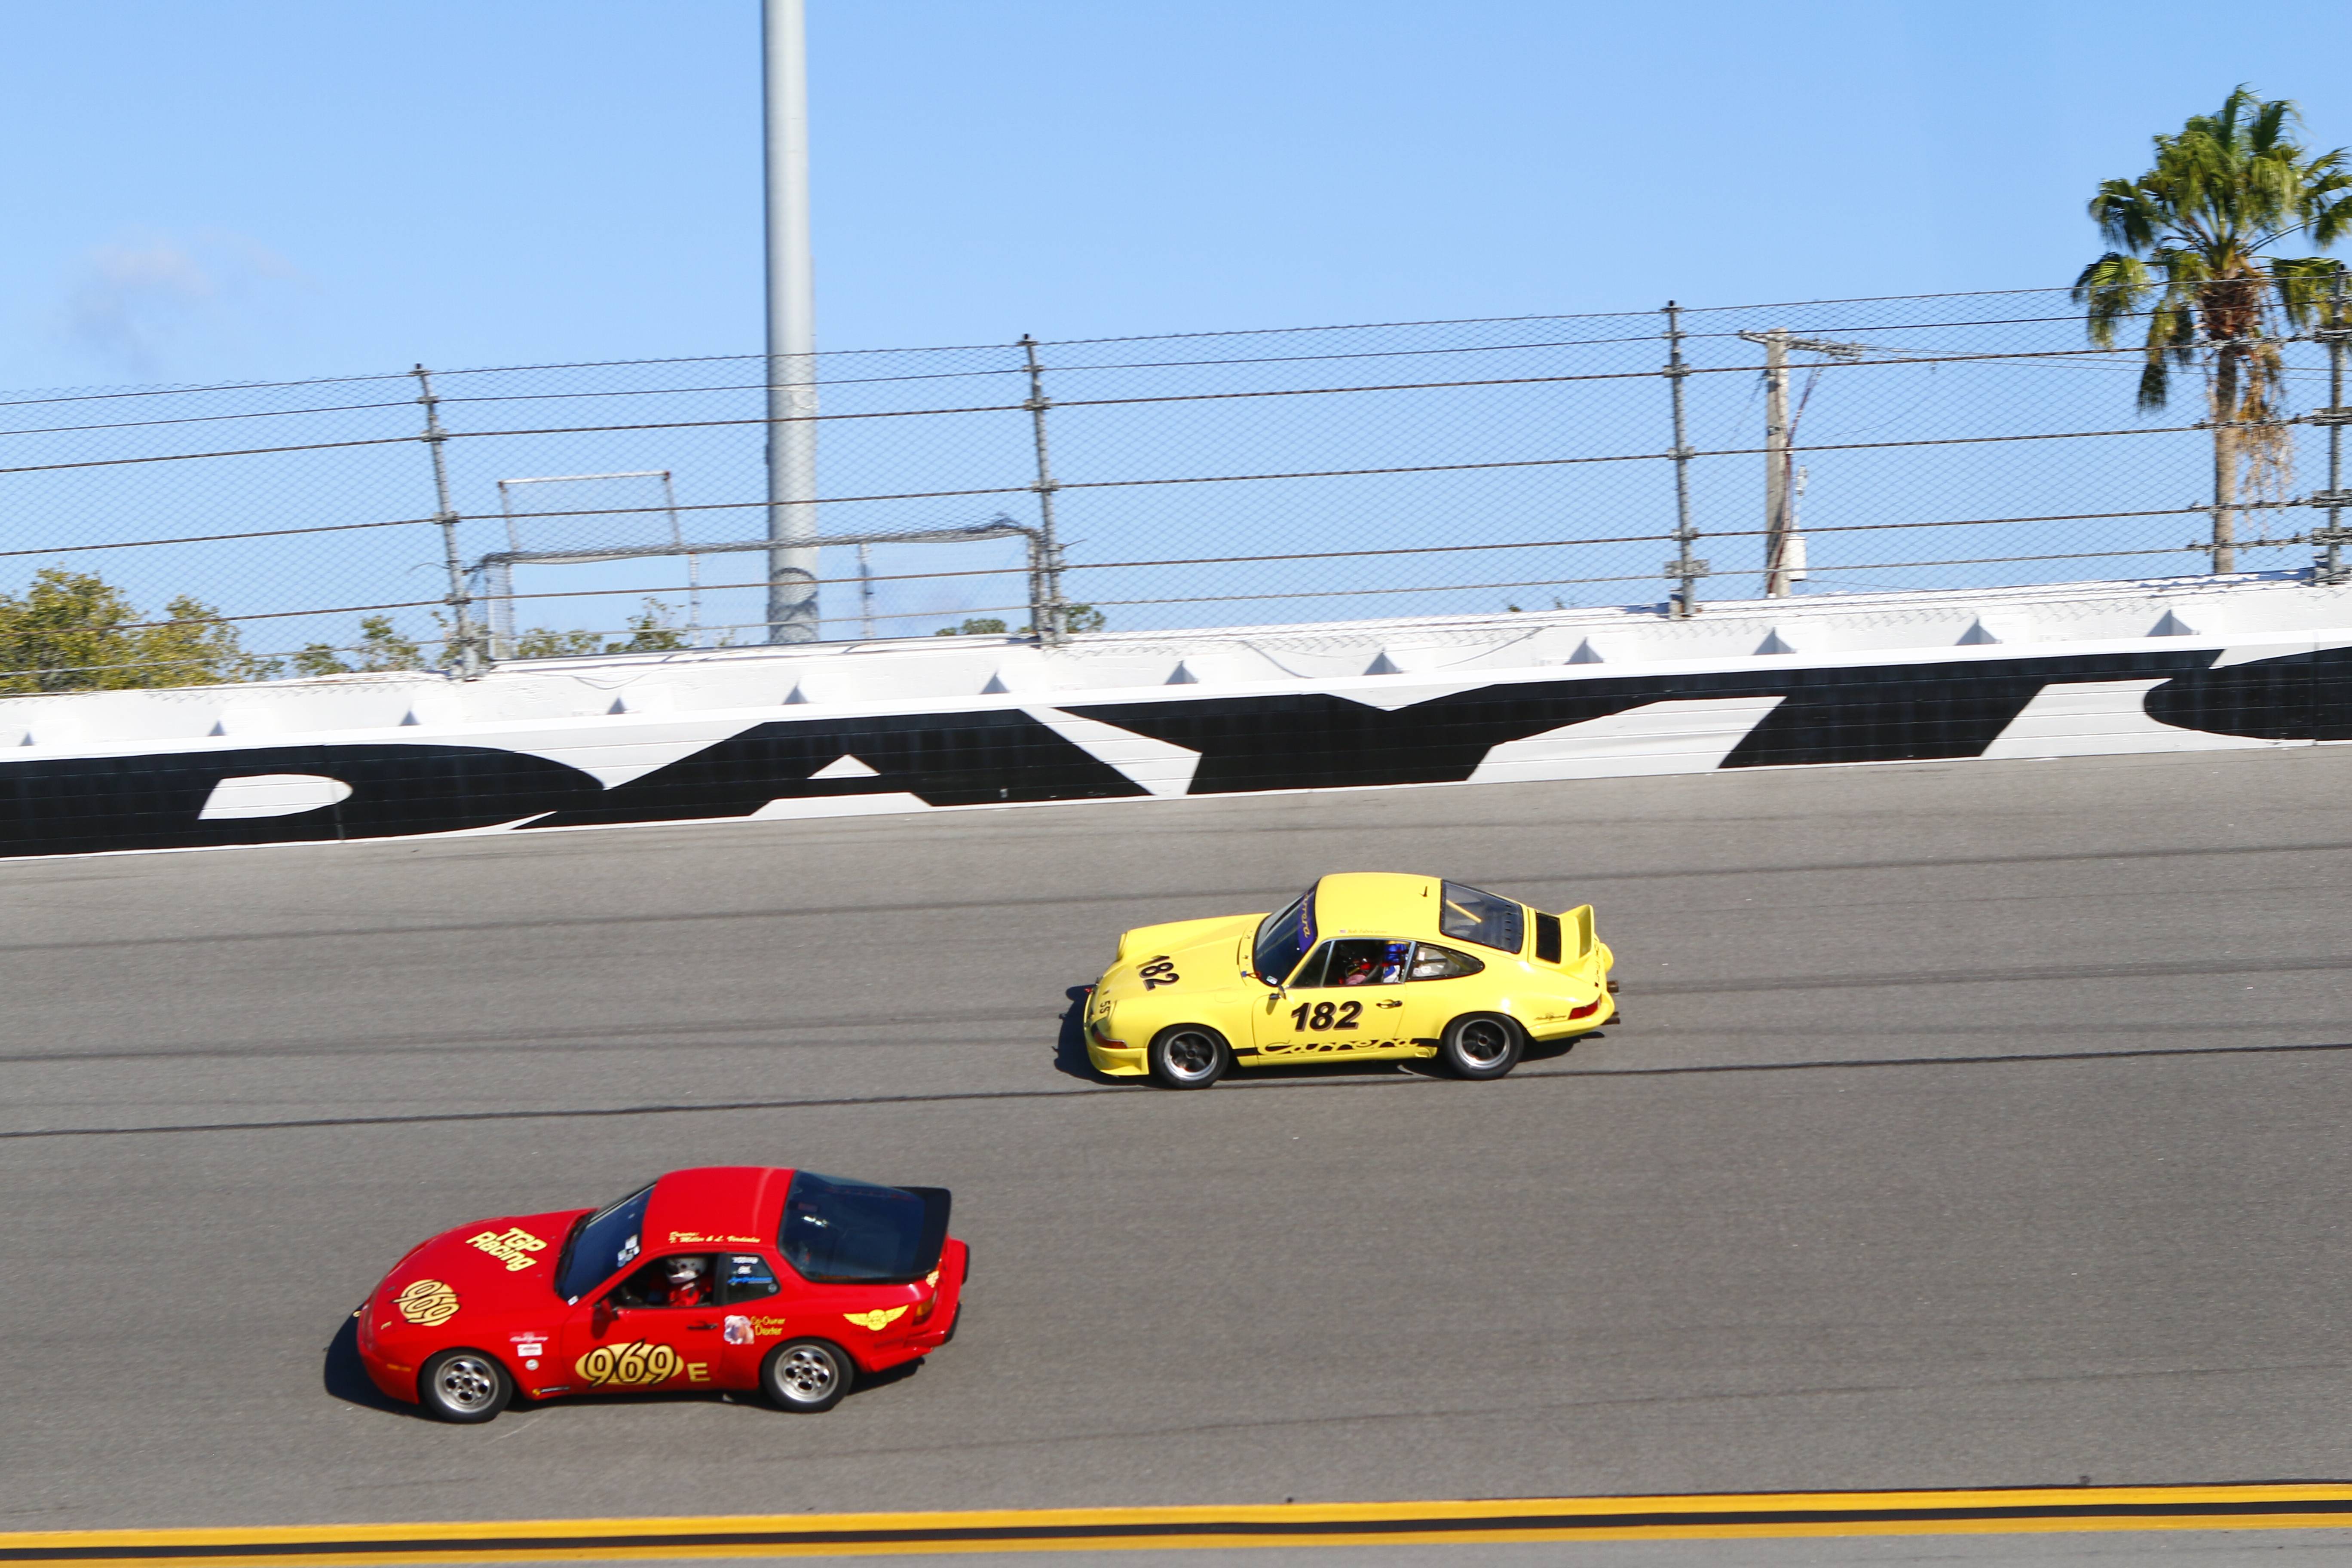 Passing On The "Low Side" At Daytona